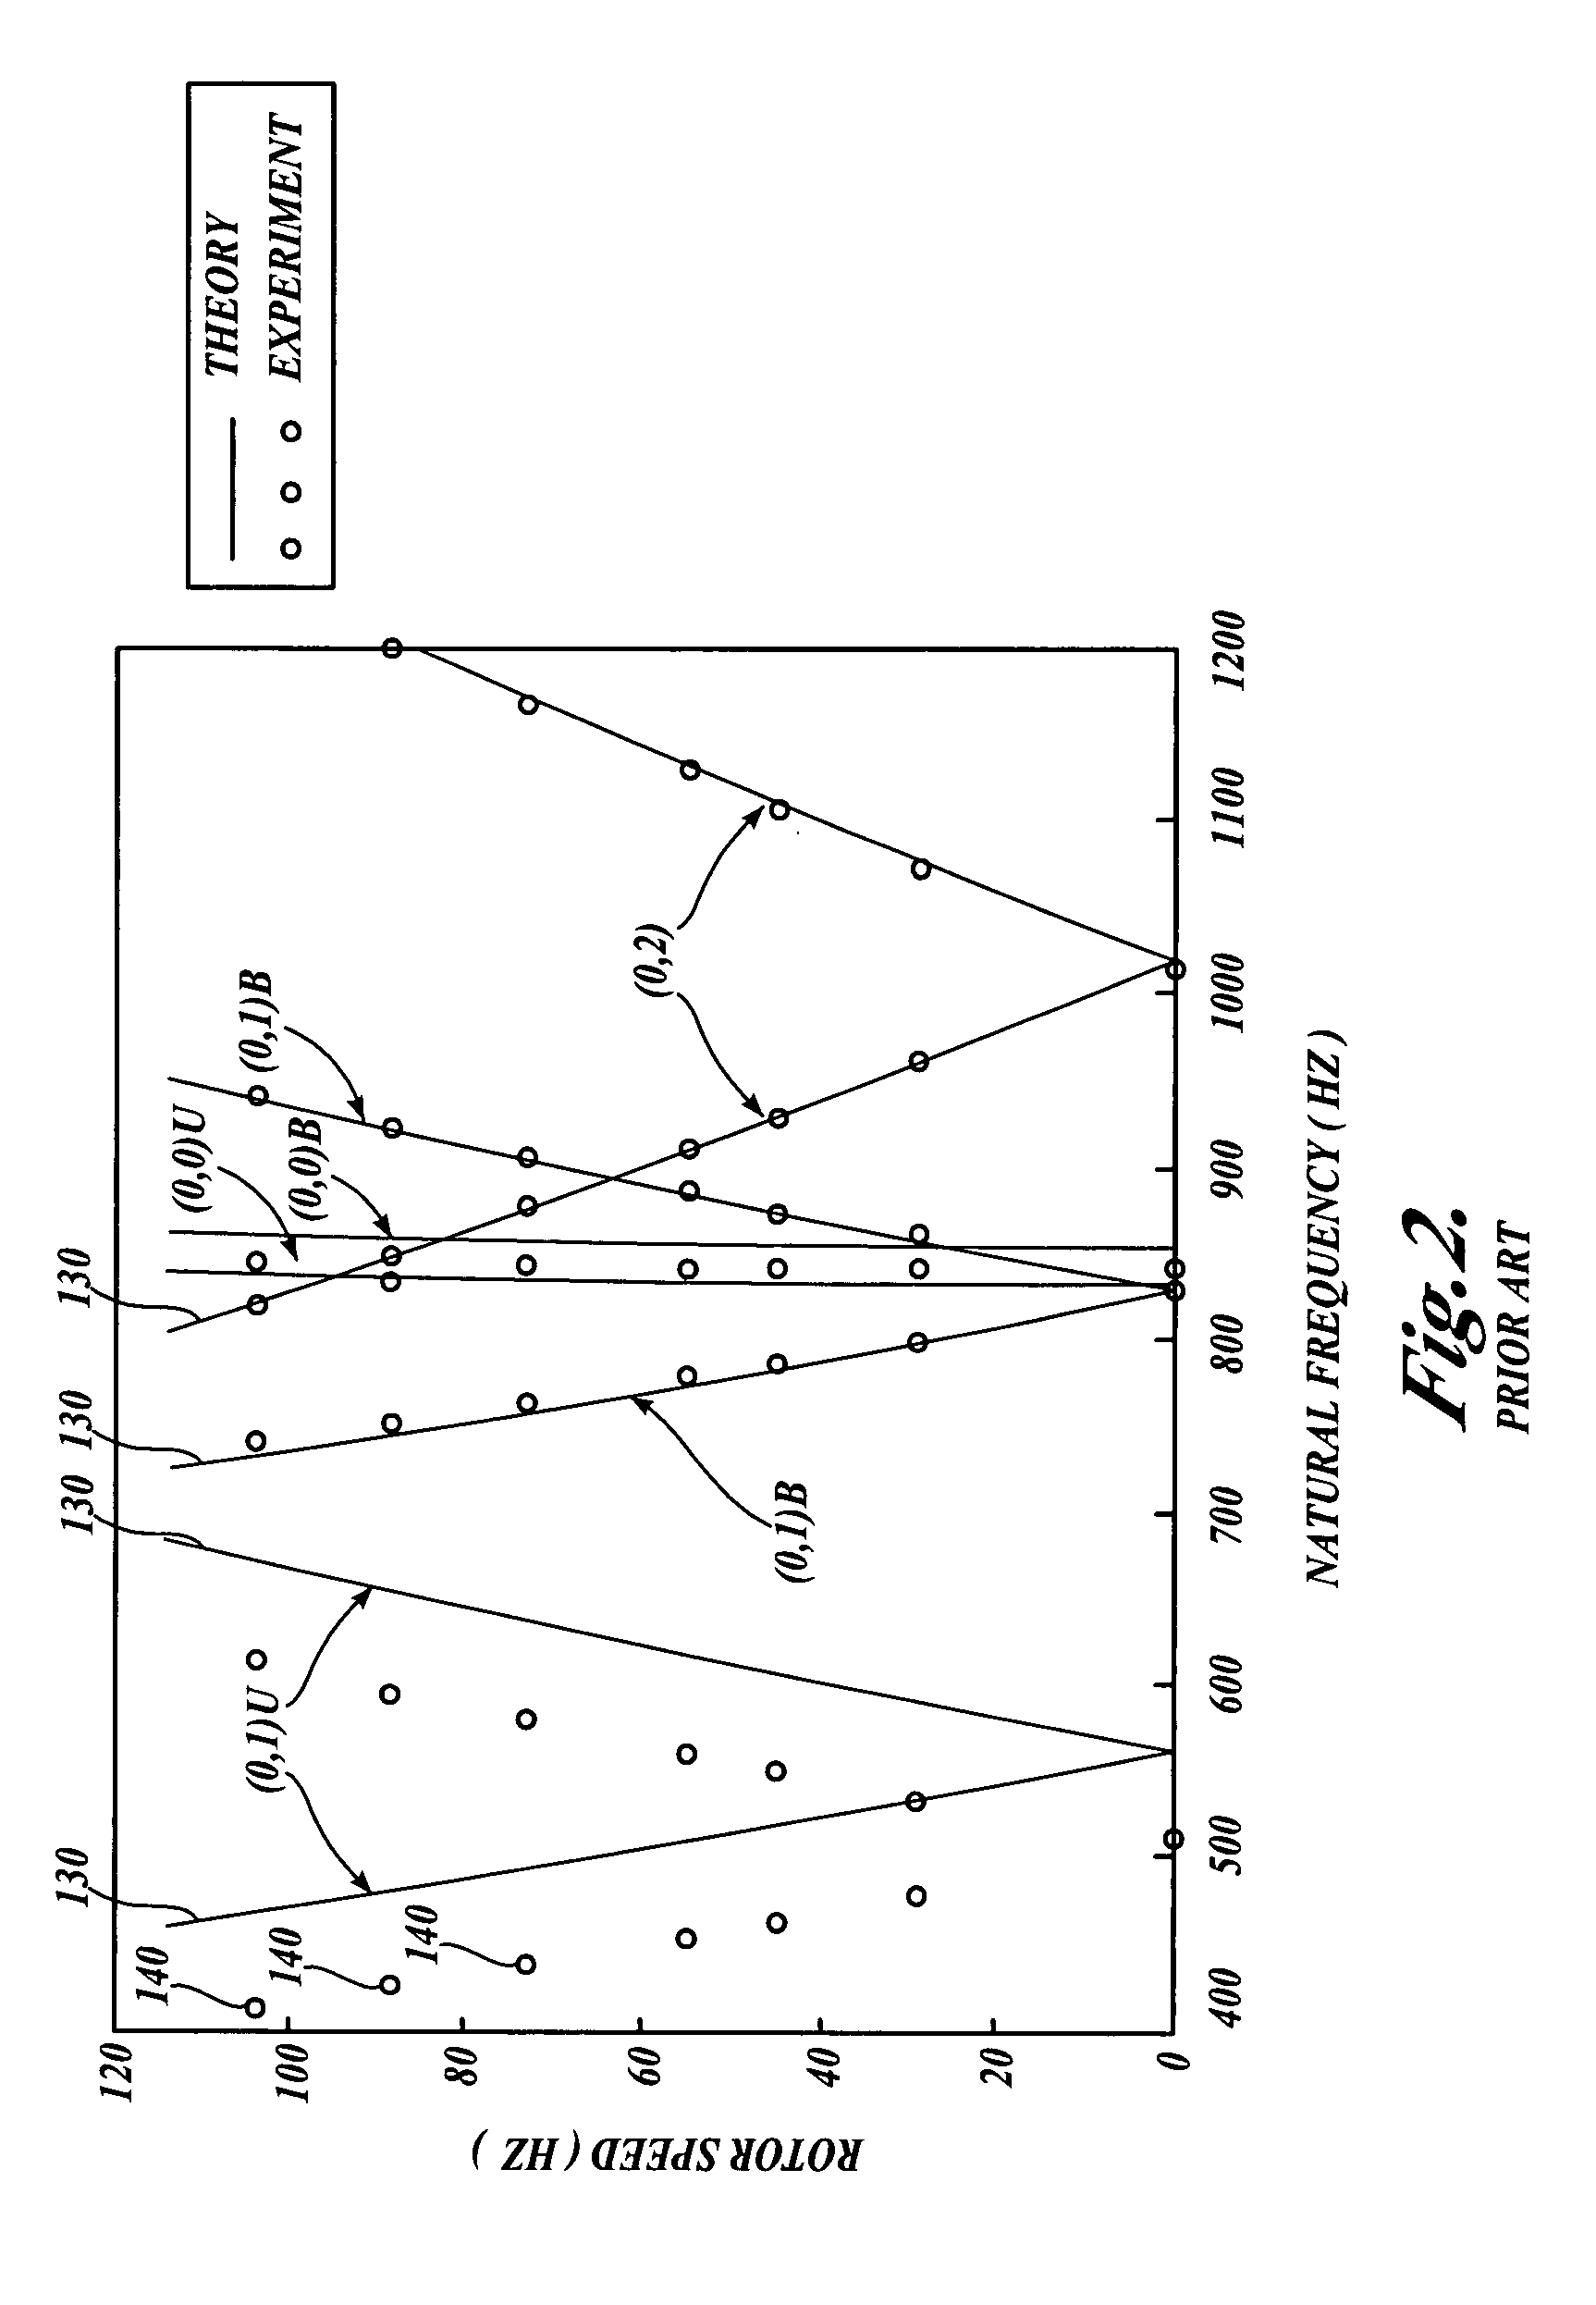 Method for predicting vibrational characteristics of rotating structures